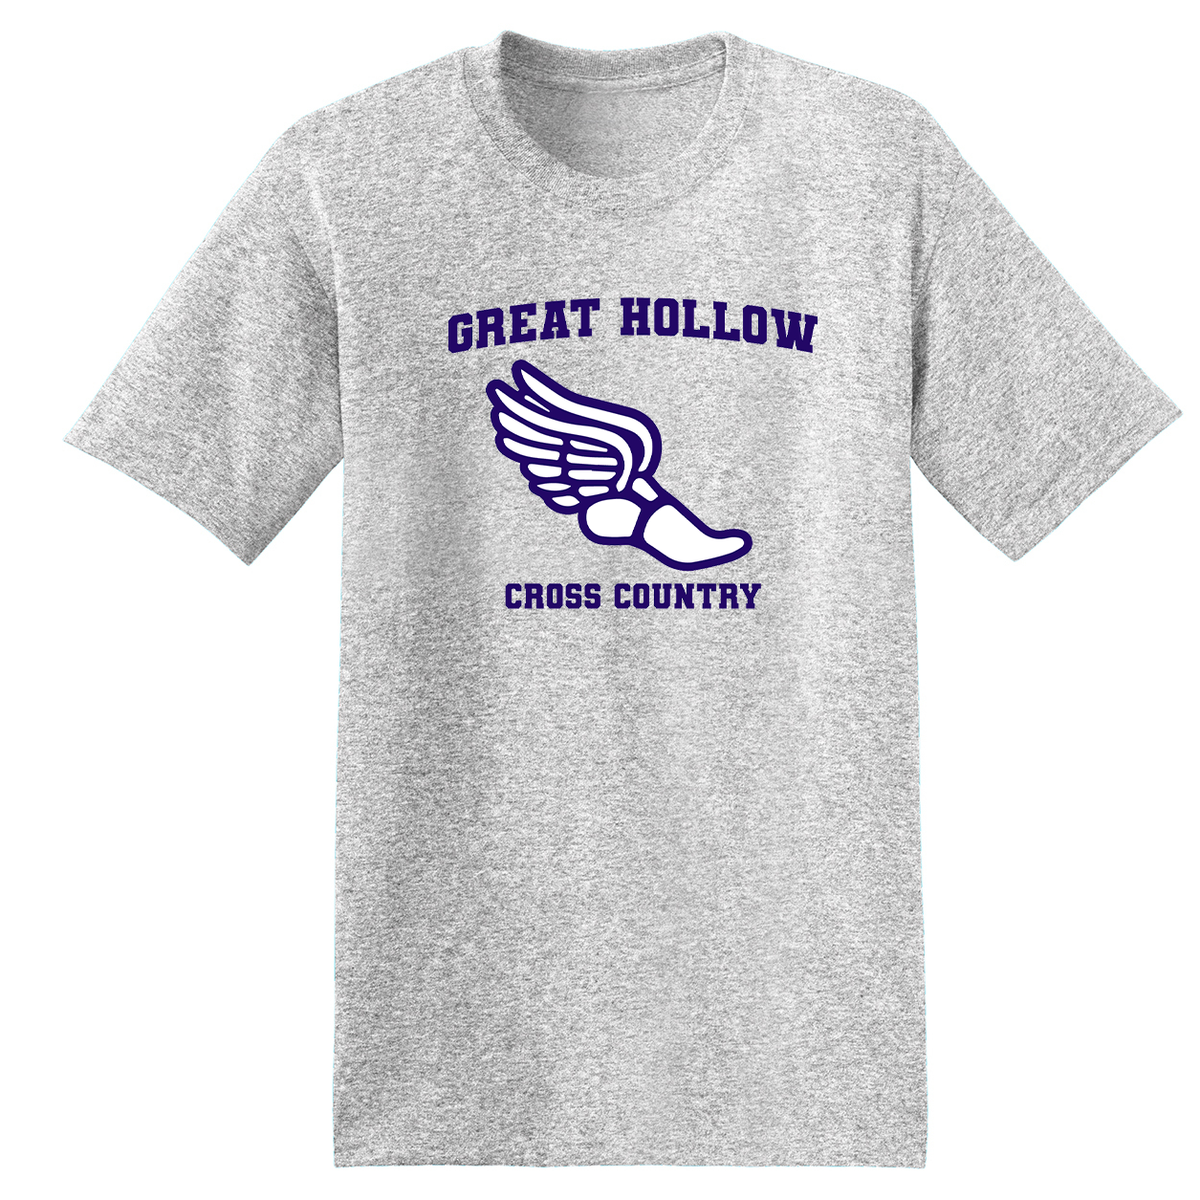 Great Hollow Cross Country T-Shirt